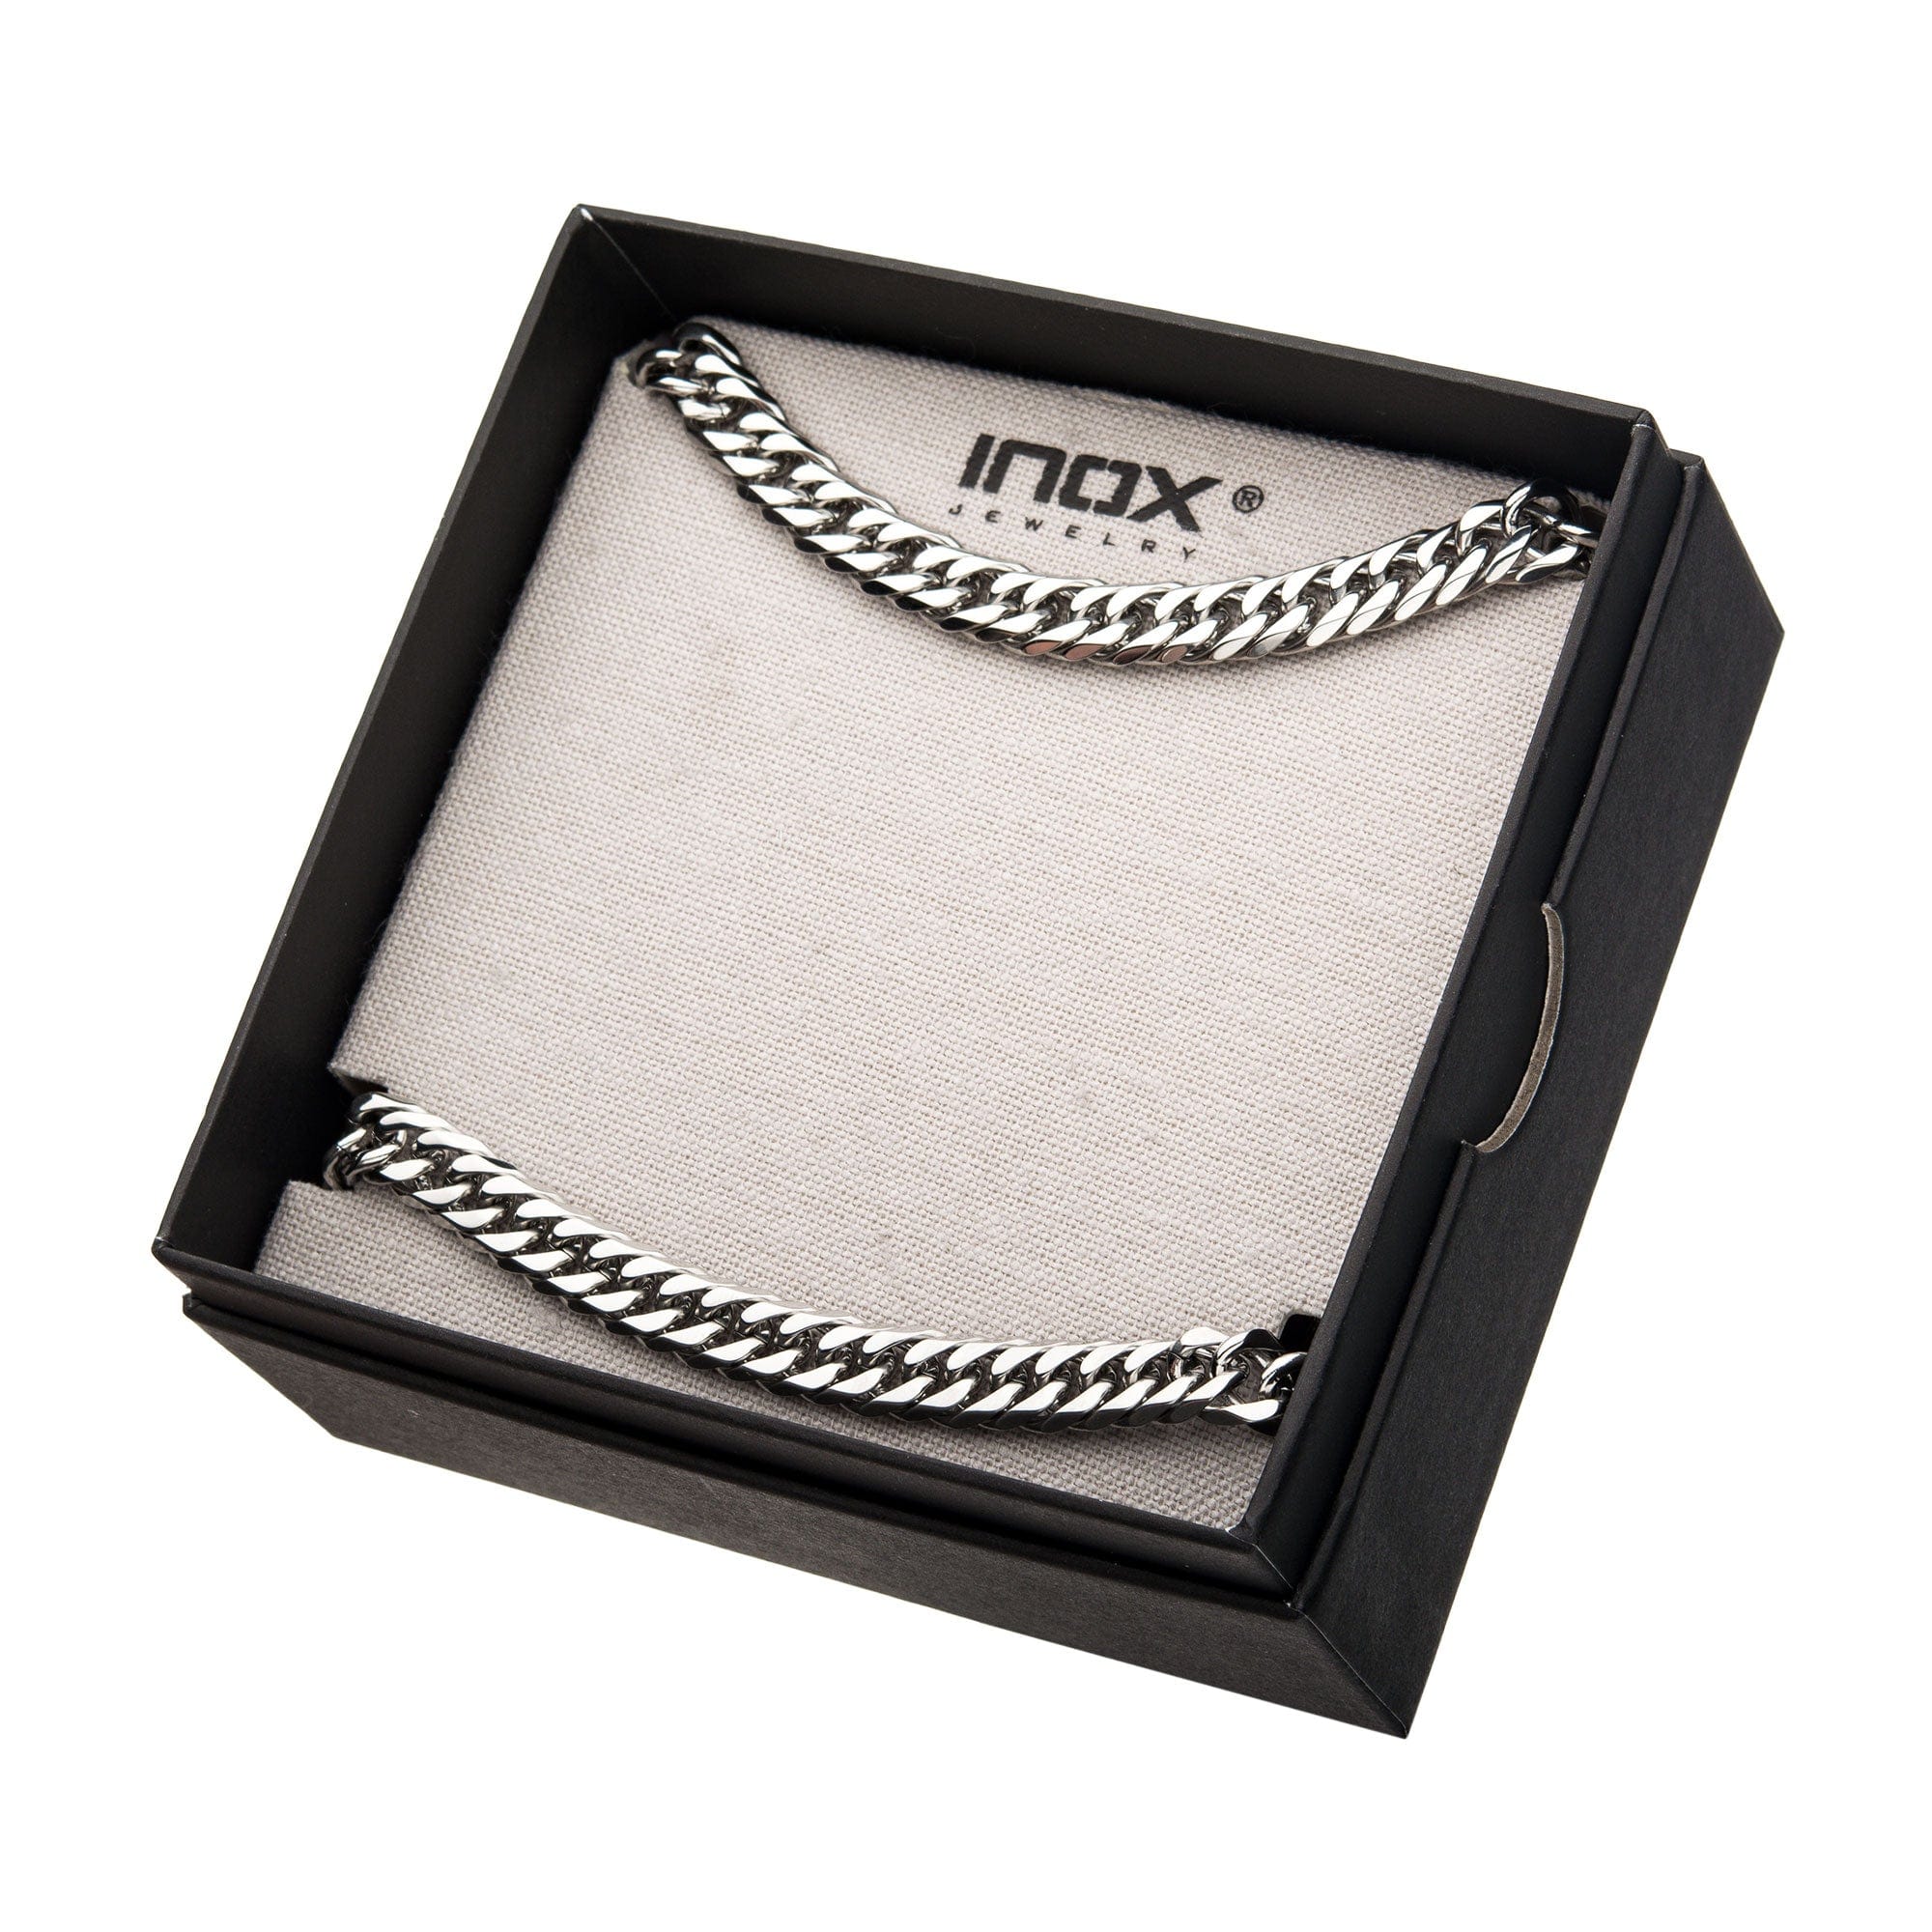 INOX JEWELRY Chains Silver Tone Stainless Steel 8mm Double Curb Chain and Bracelet Set NSTC0508-SET